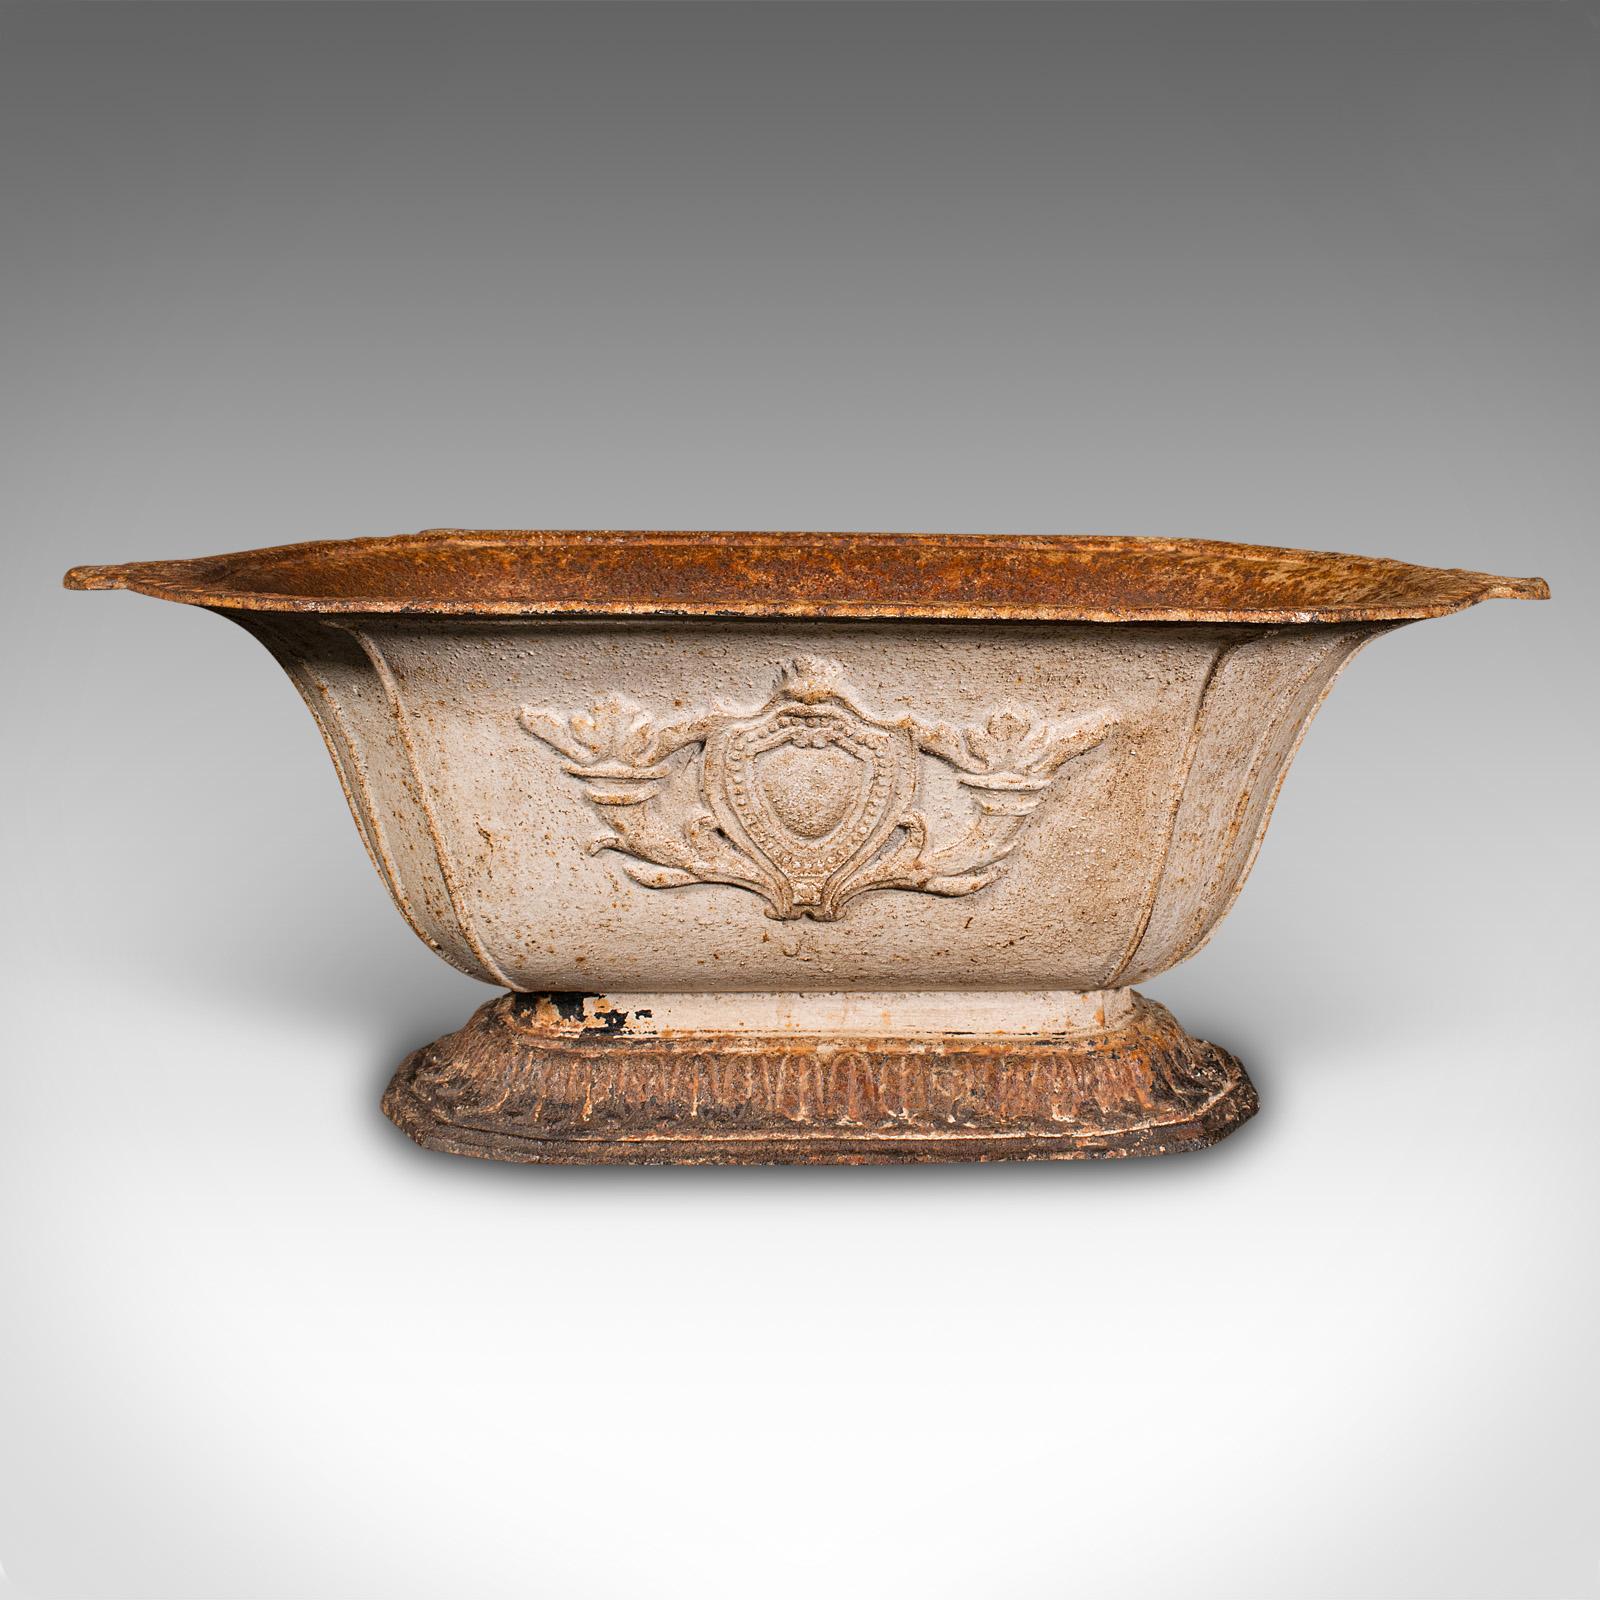 This is an antique decorative planter. An English, cast iron footed jardiniere pot, dating to the early Victorian period, circa 1850.

Of appealing 19th century taste, with a finely weathered appearance
Displays a desirable aged patina and presented